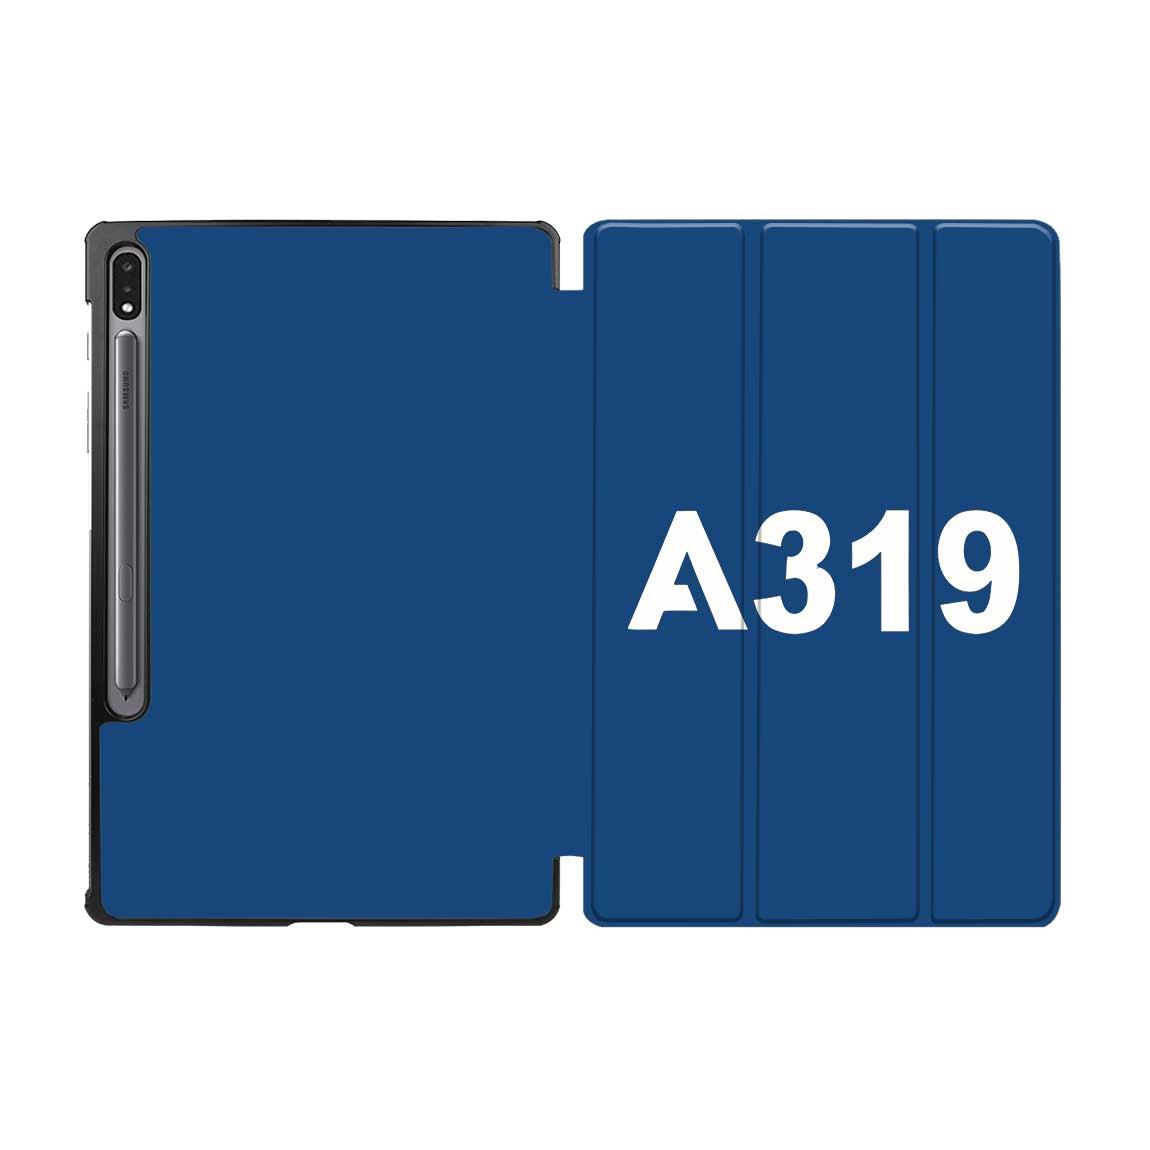 A319 Flat Text Designed Samsung Tablet Cases